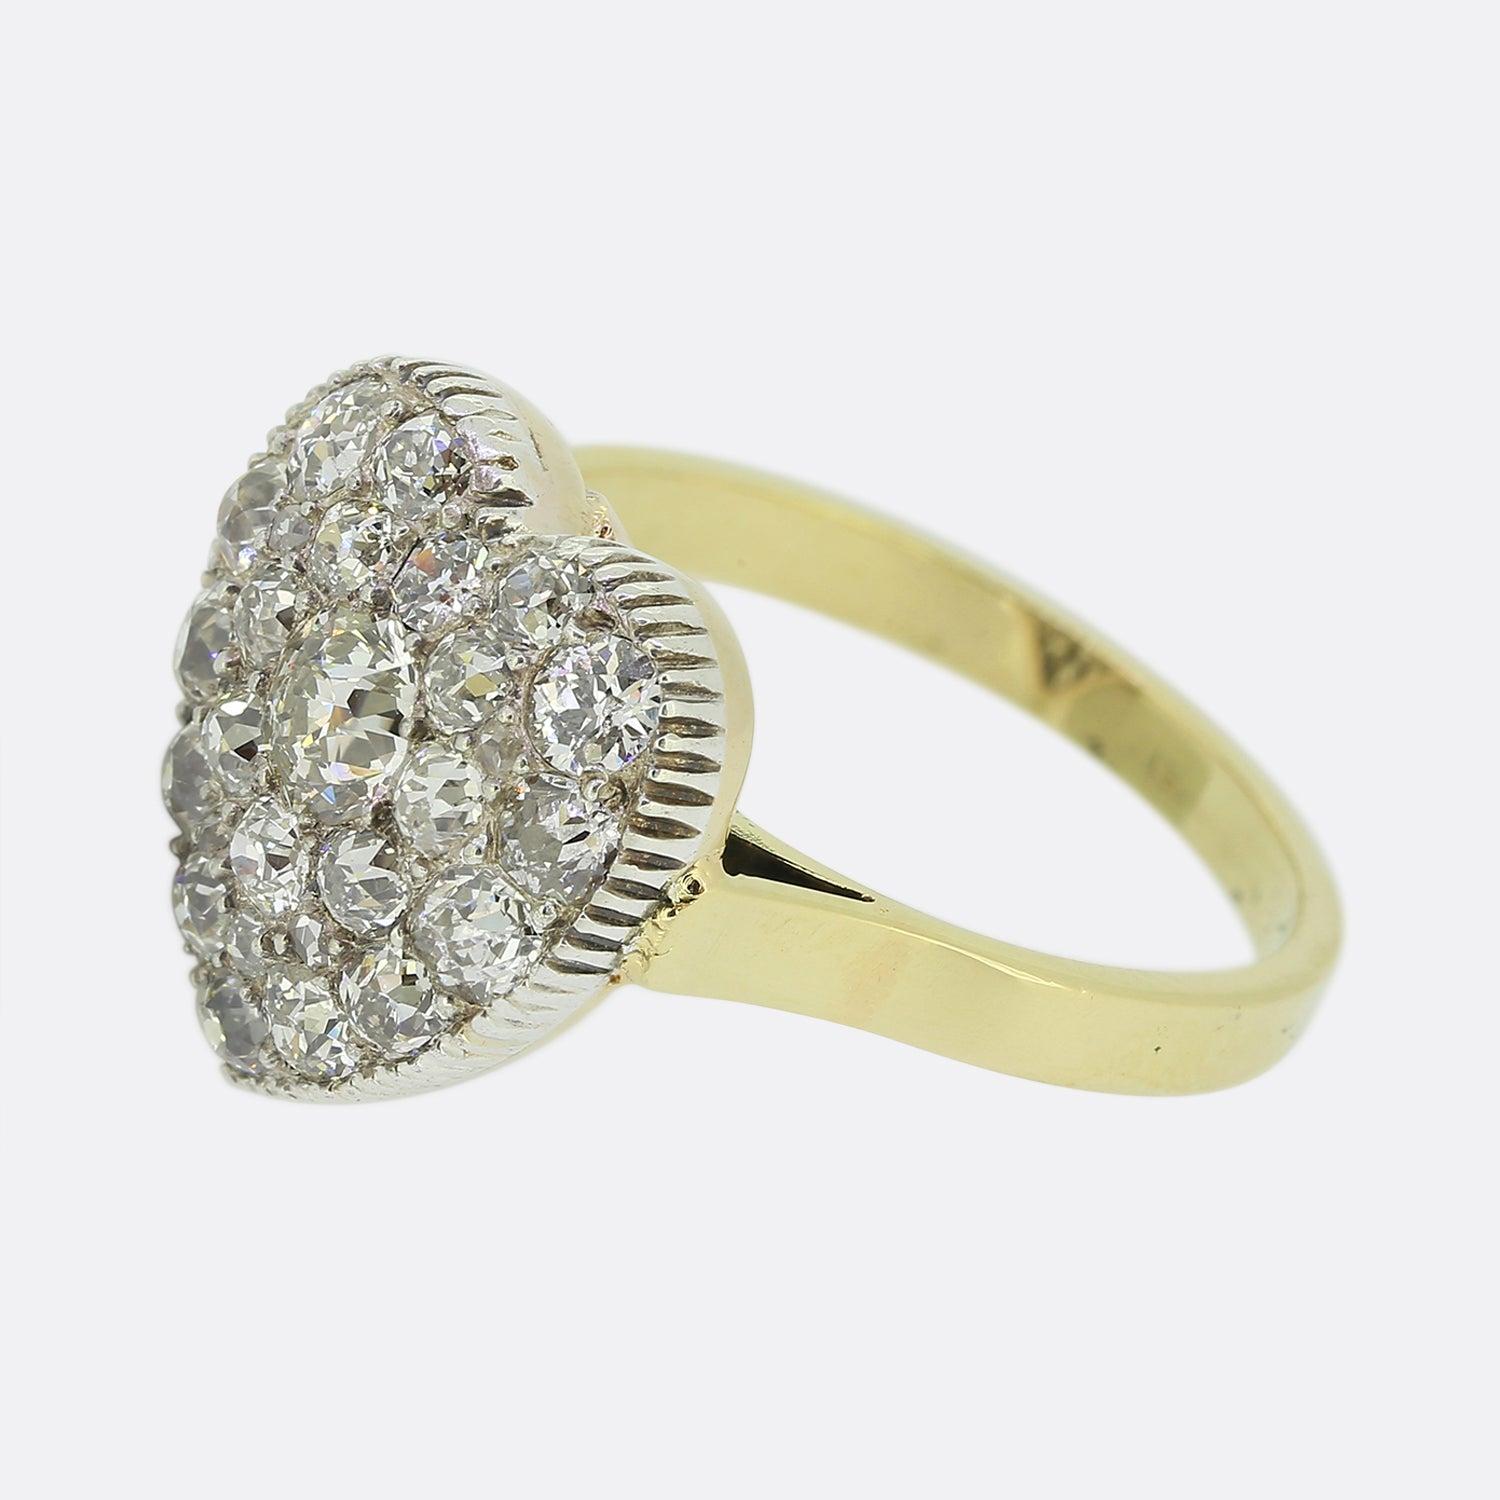 Here we have a beautifully assembled diamond cluster ring dating back to the Victorian period. The head of the piece has been crafted from platinum into the shape of a love heart with a collect setting around the outer edge playing host to a vast